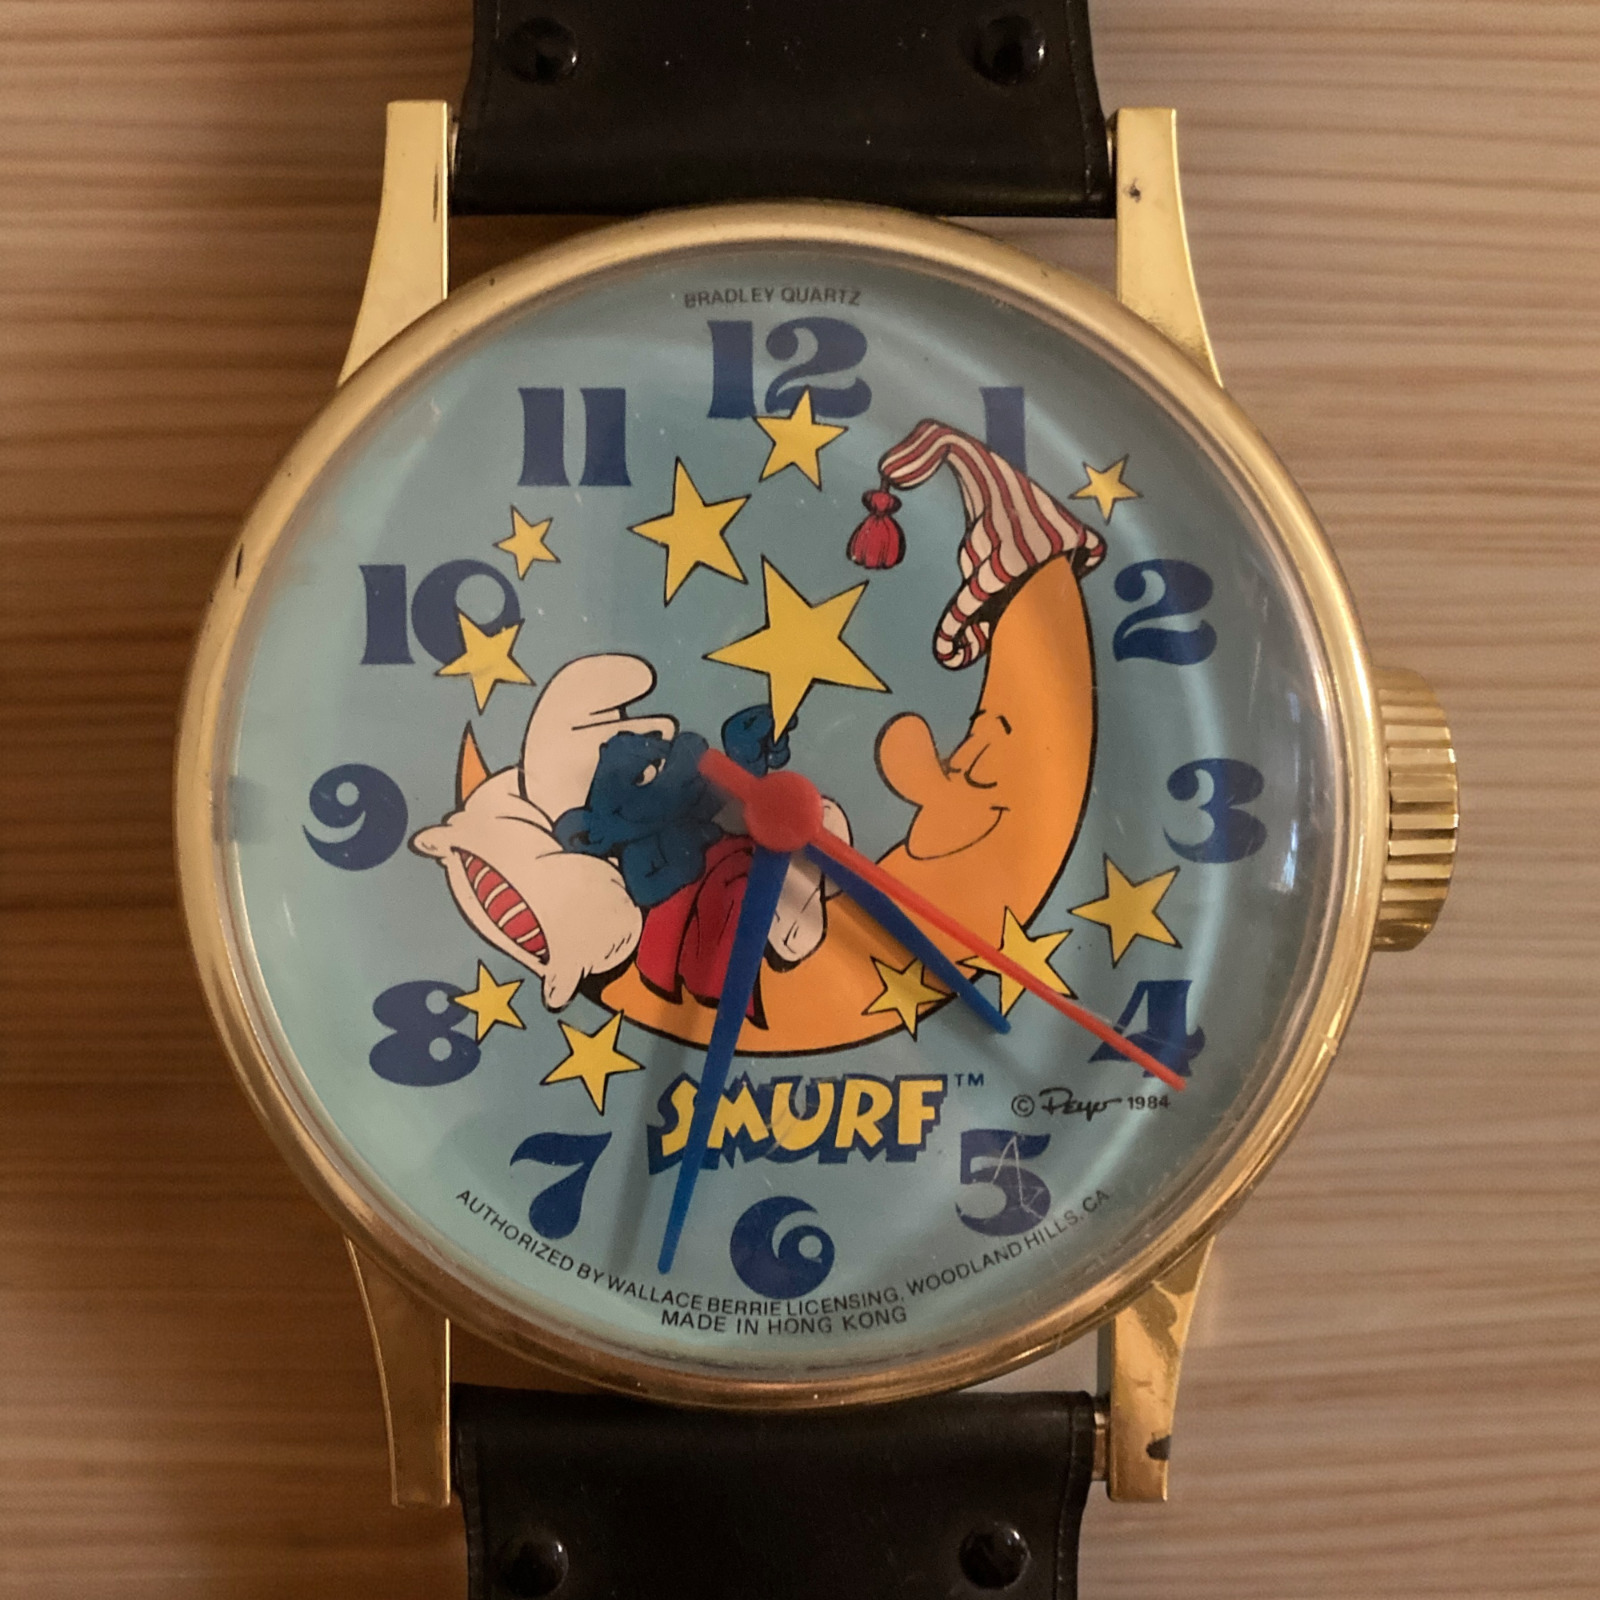 Vintage Smurf Wrist-Watch Style Wall Clock - TESTED WORKS